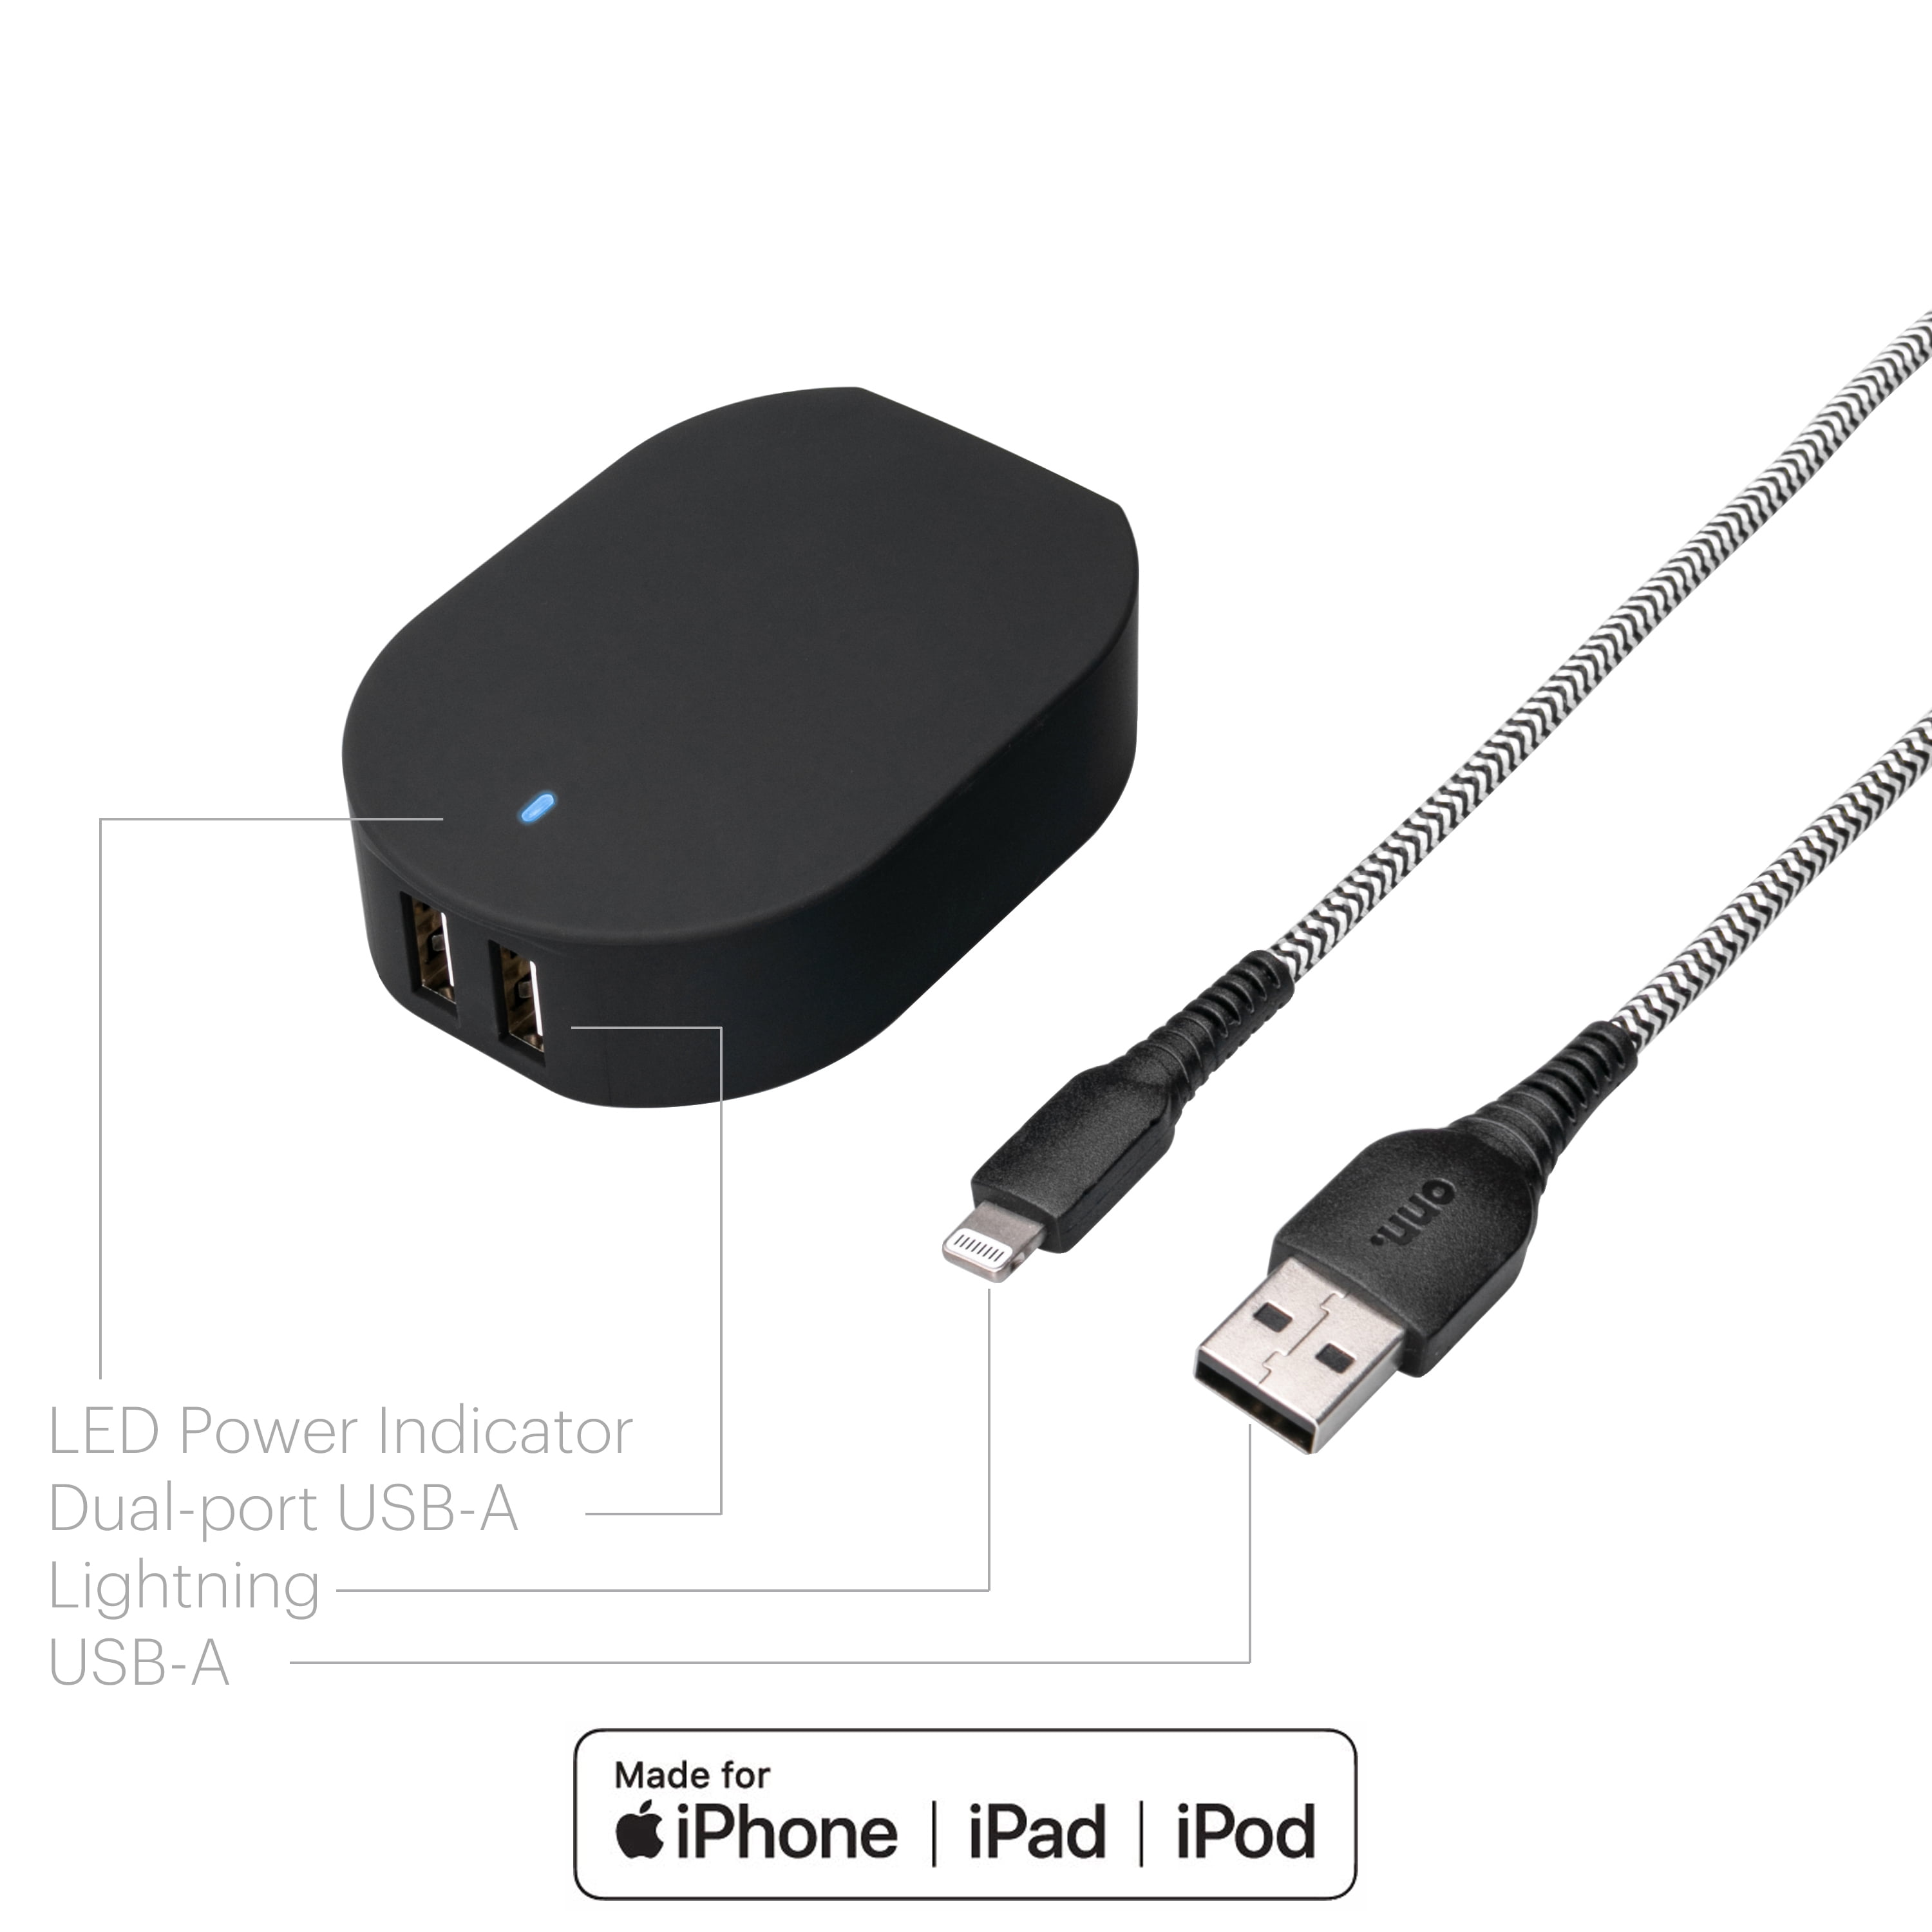 onn. Dual-Port Wall Charging Kit with 3FT Lightning to USB Cable, Black,Apple MFi Certified both cable and charger. Travel friendly plug, cell phone charger